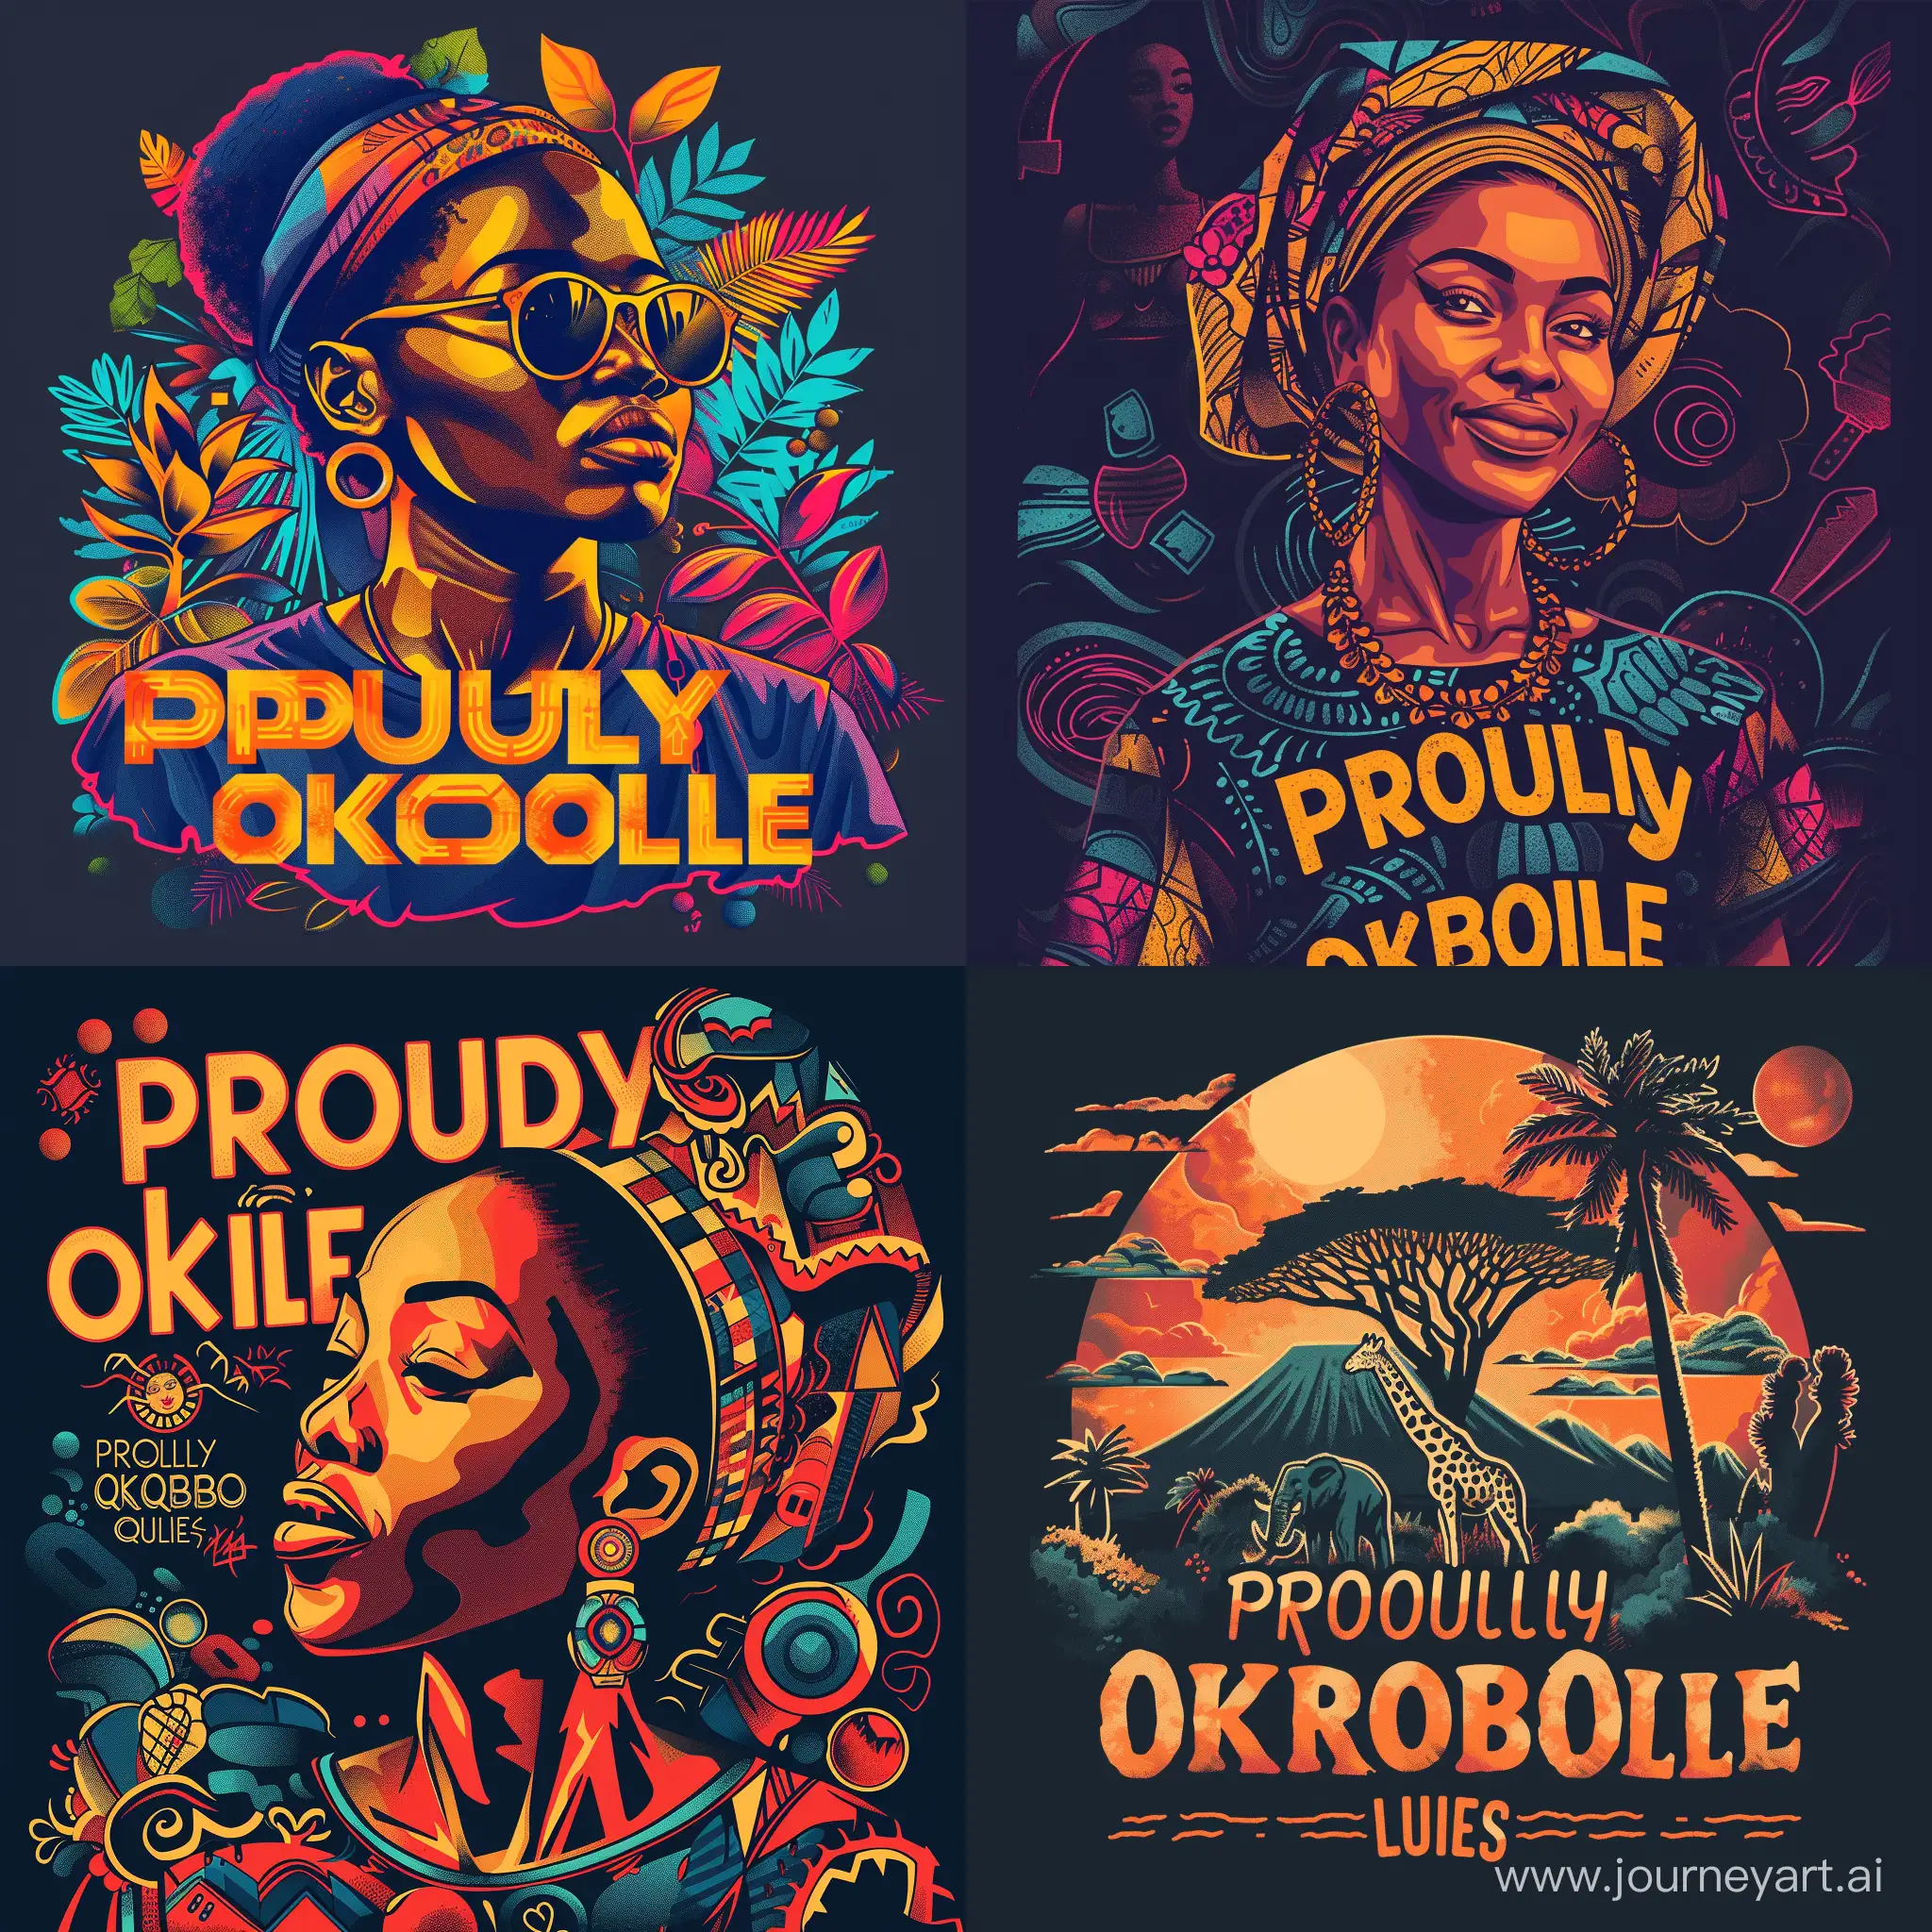 Create a captivating t-shirt design featuring the phrase "proudly OKOROBOILE" as the focal point. Incorporate elements that reflect pride, strength, and uniqueness. Consider using bold typography, vibrant colors, and symbolic imagery to convey the message effectively.